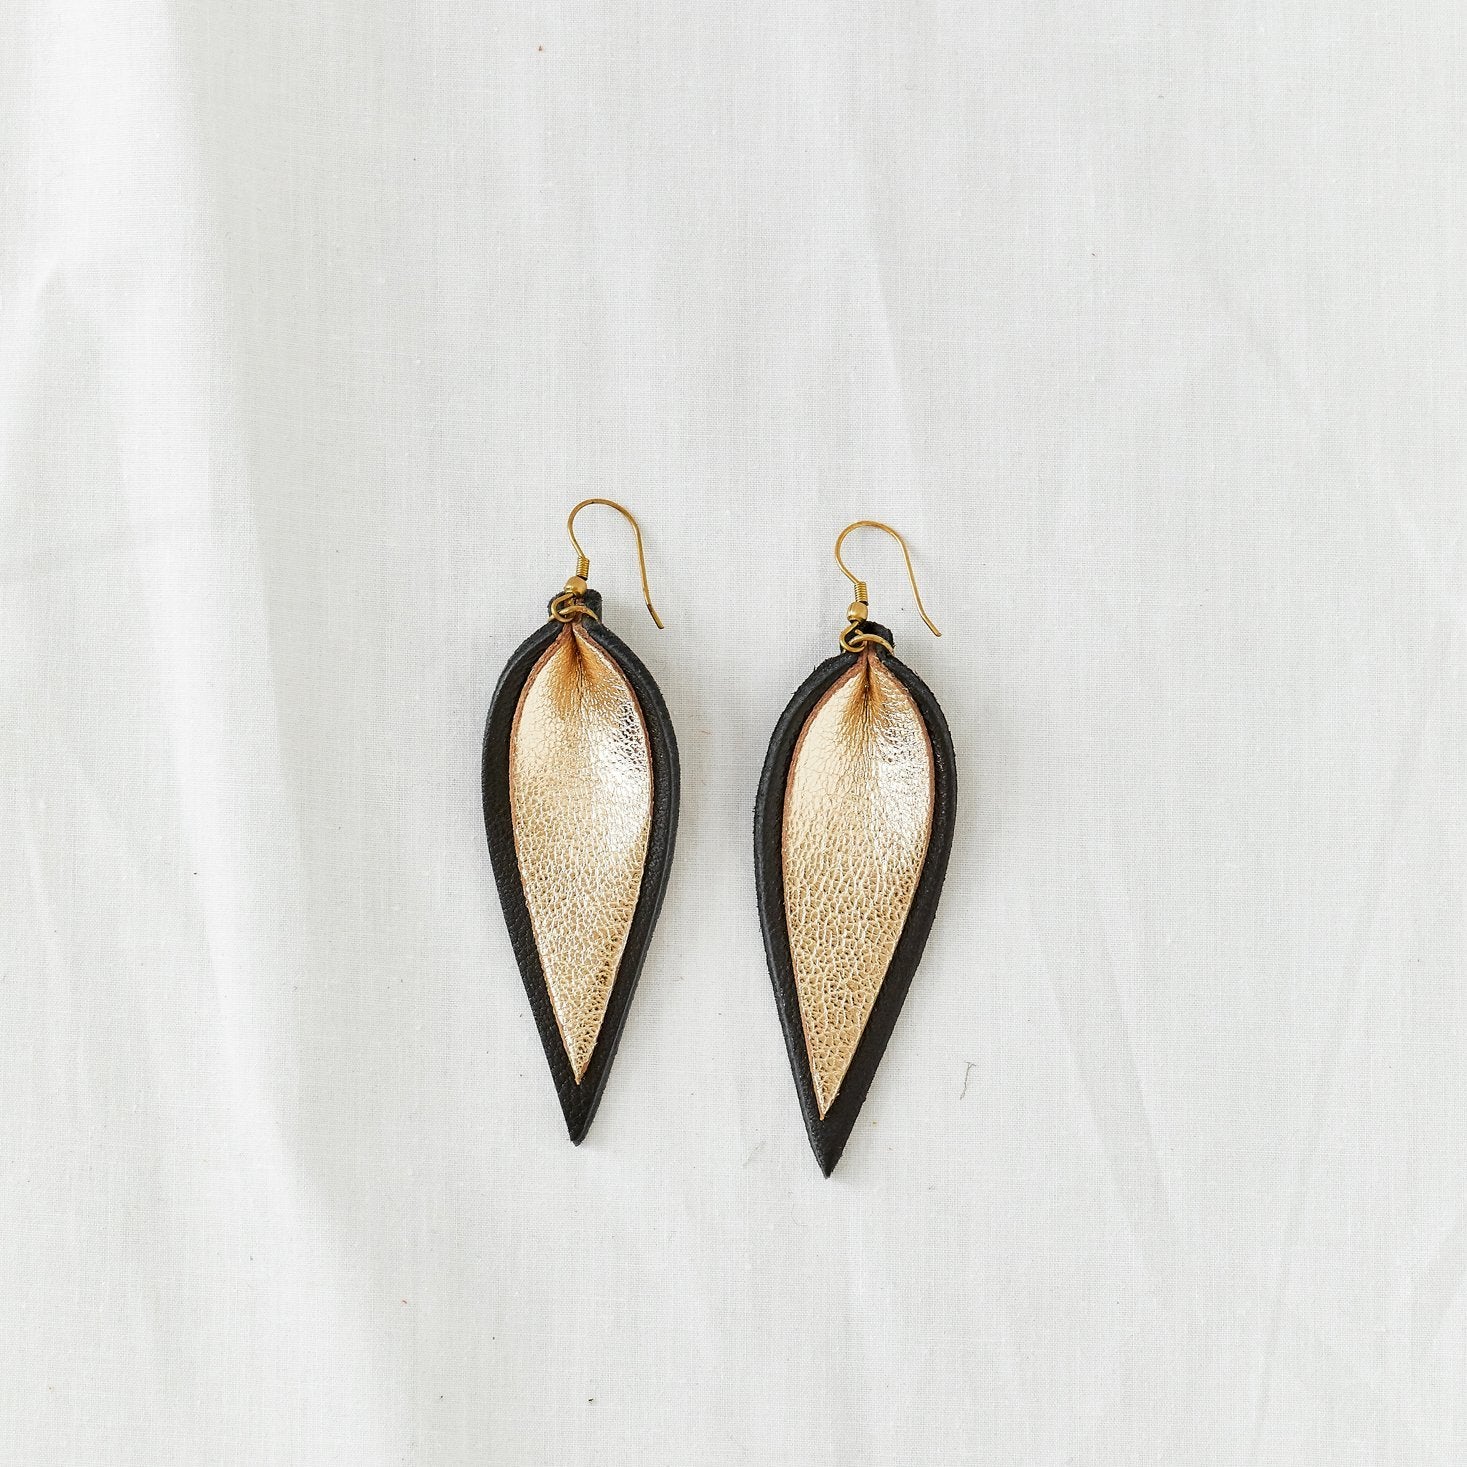 Classic design that transitions effortlessly from day to night, these black and gold leather leaf earrings are handcrafted from sustainable leather.